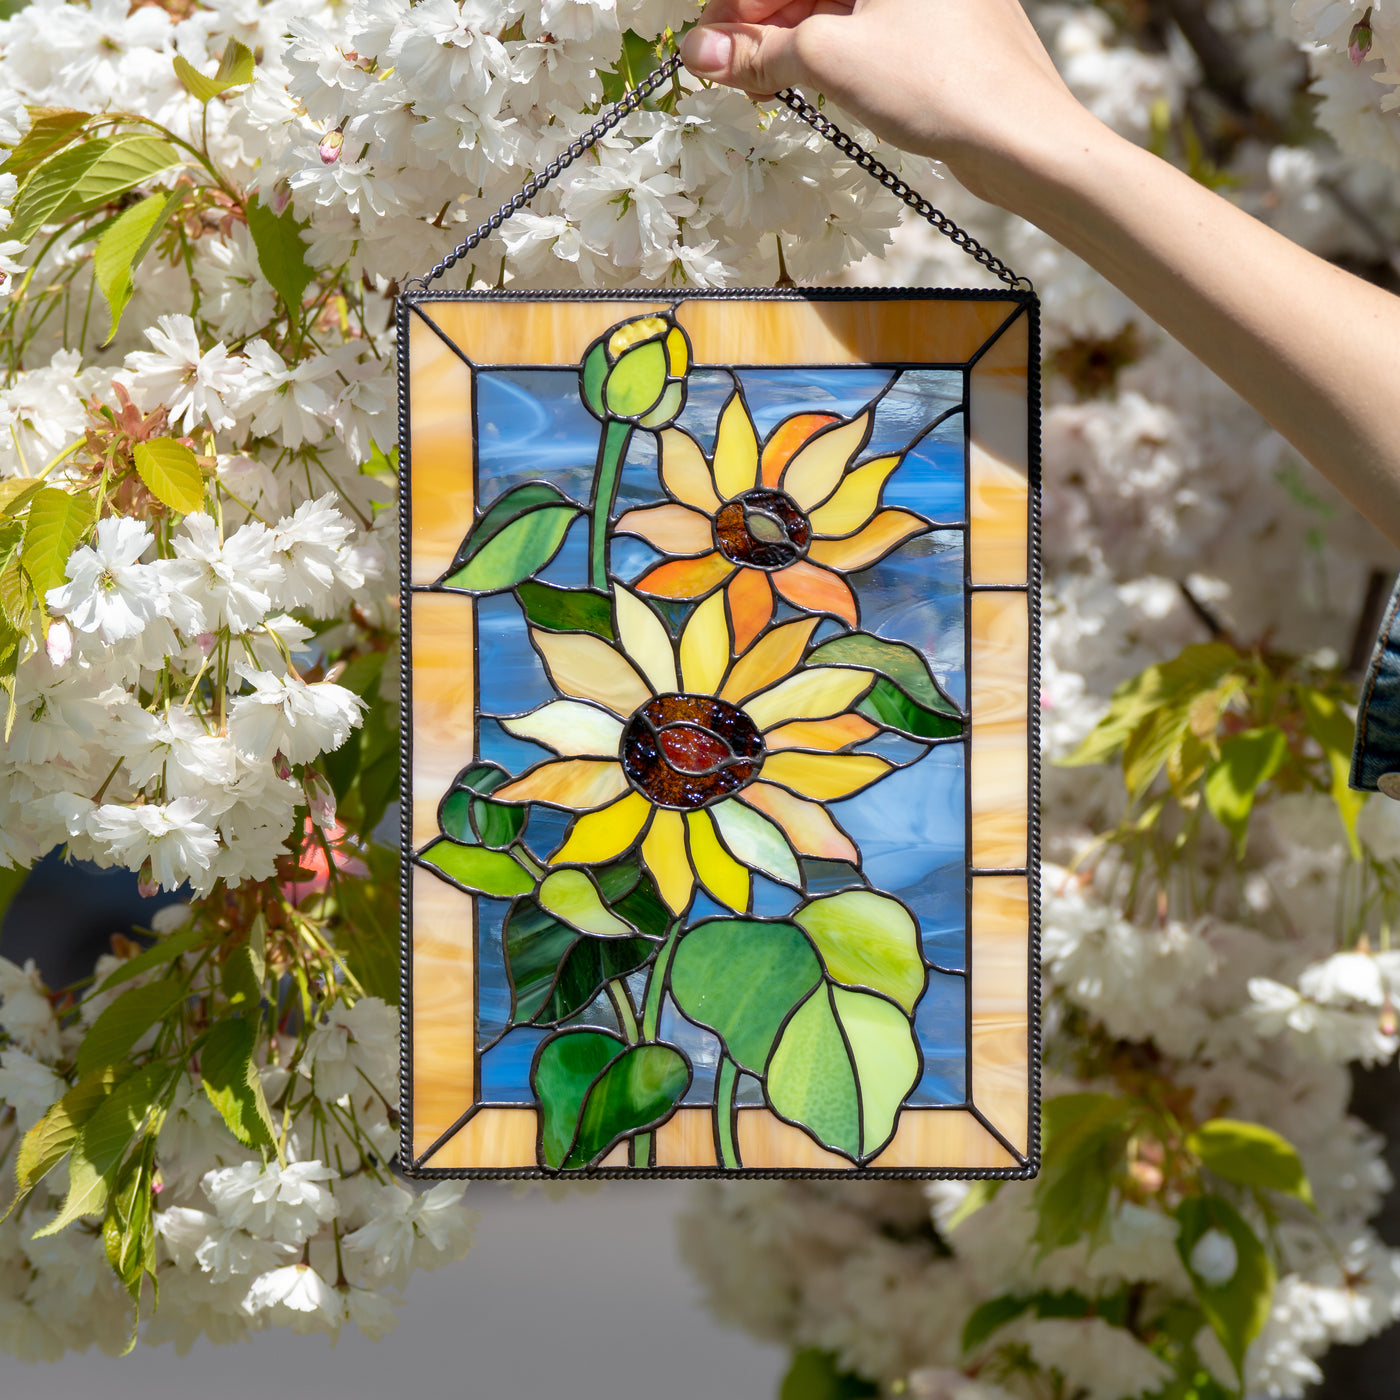 Stained glass window hanging with blue and yellow background depicting sunflowers